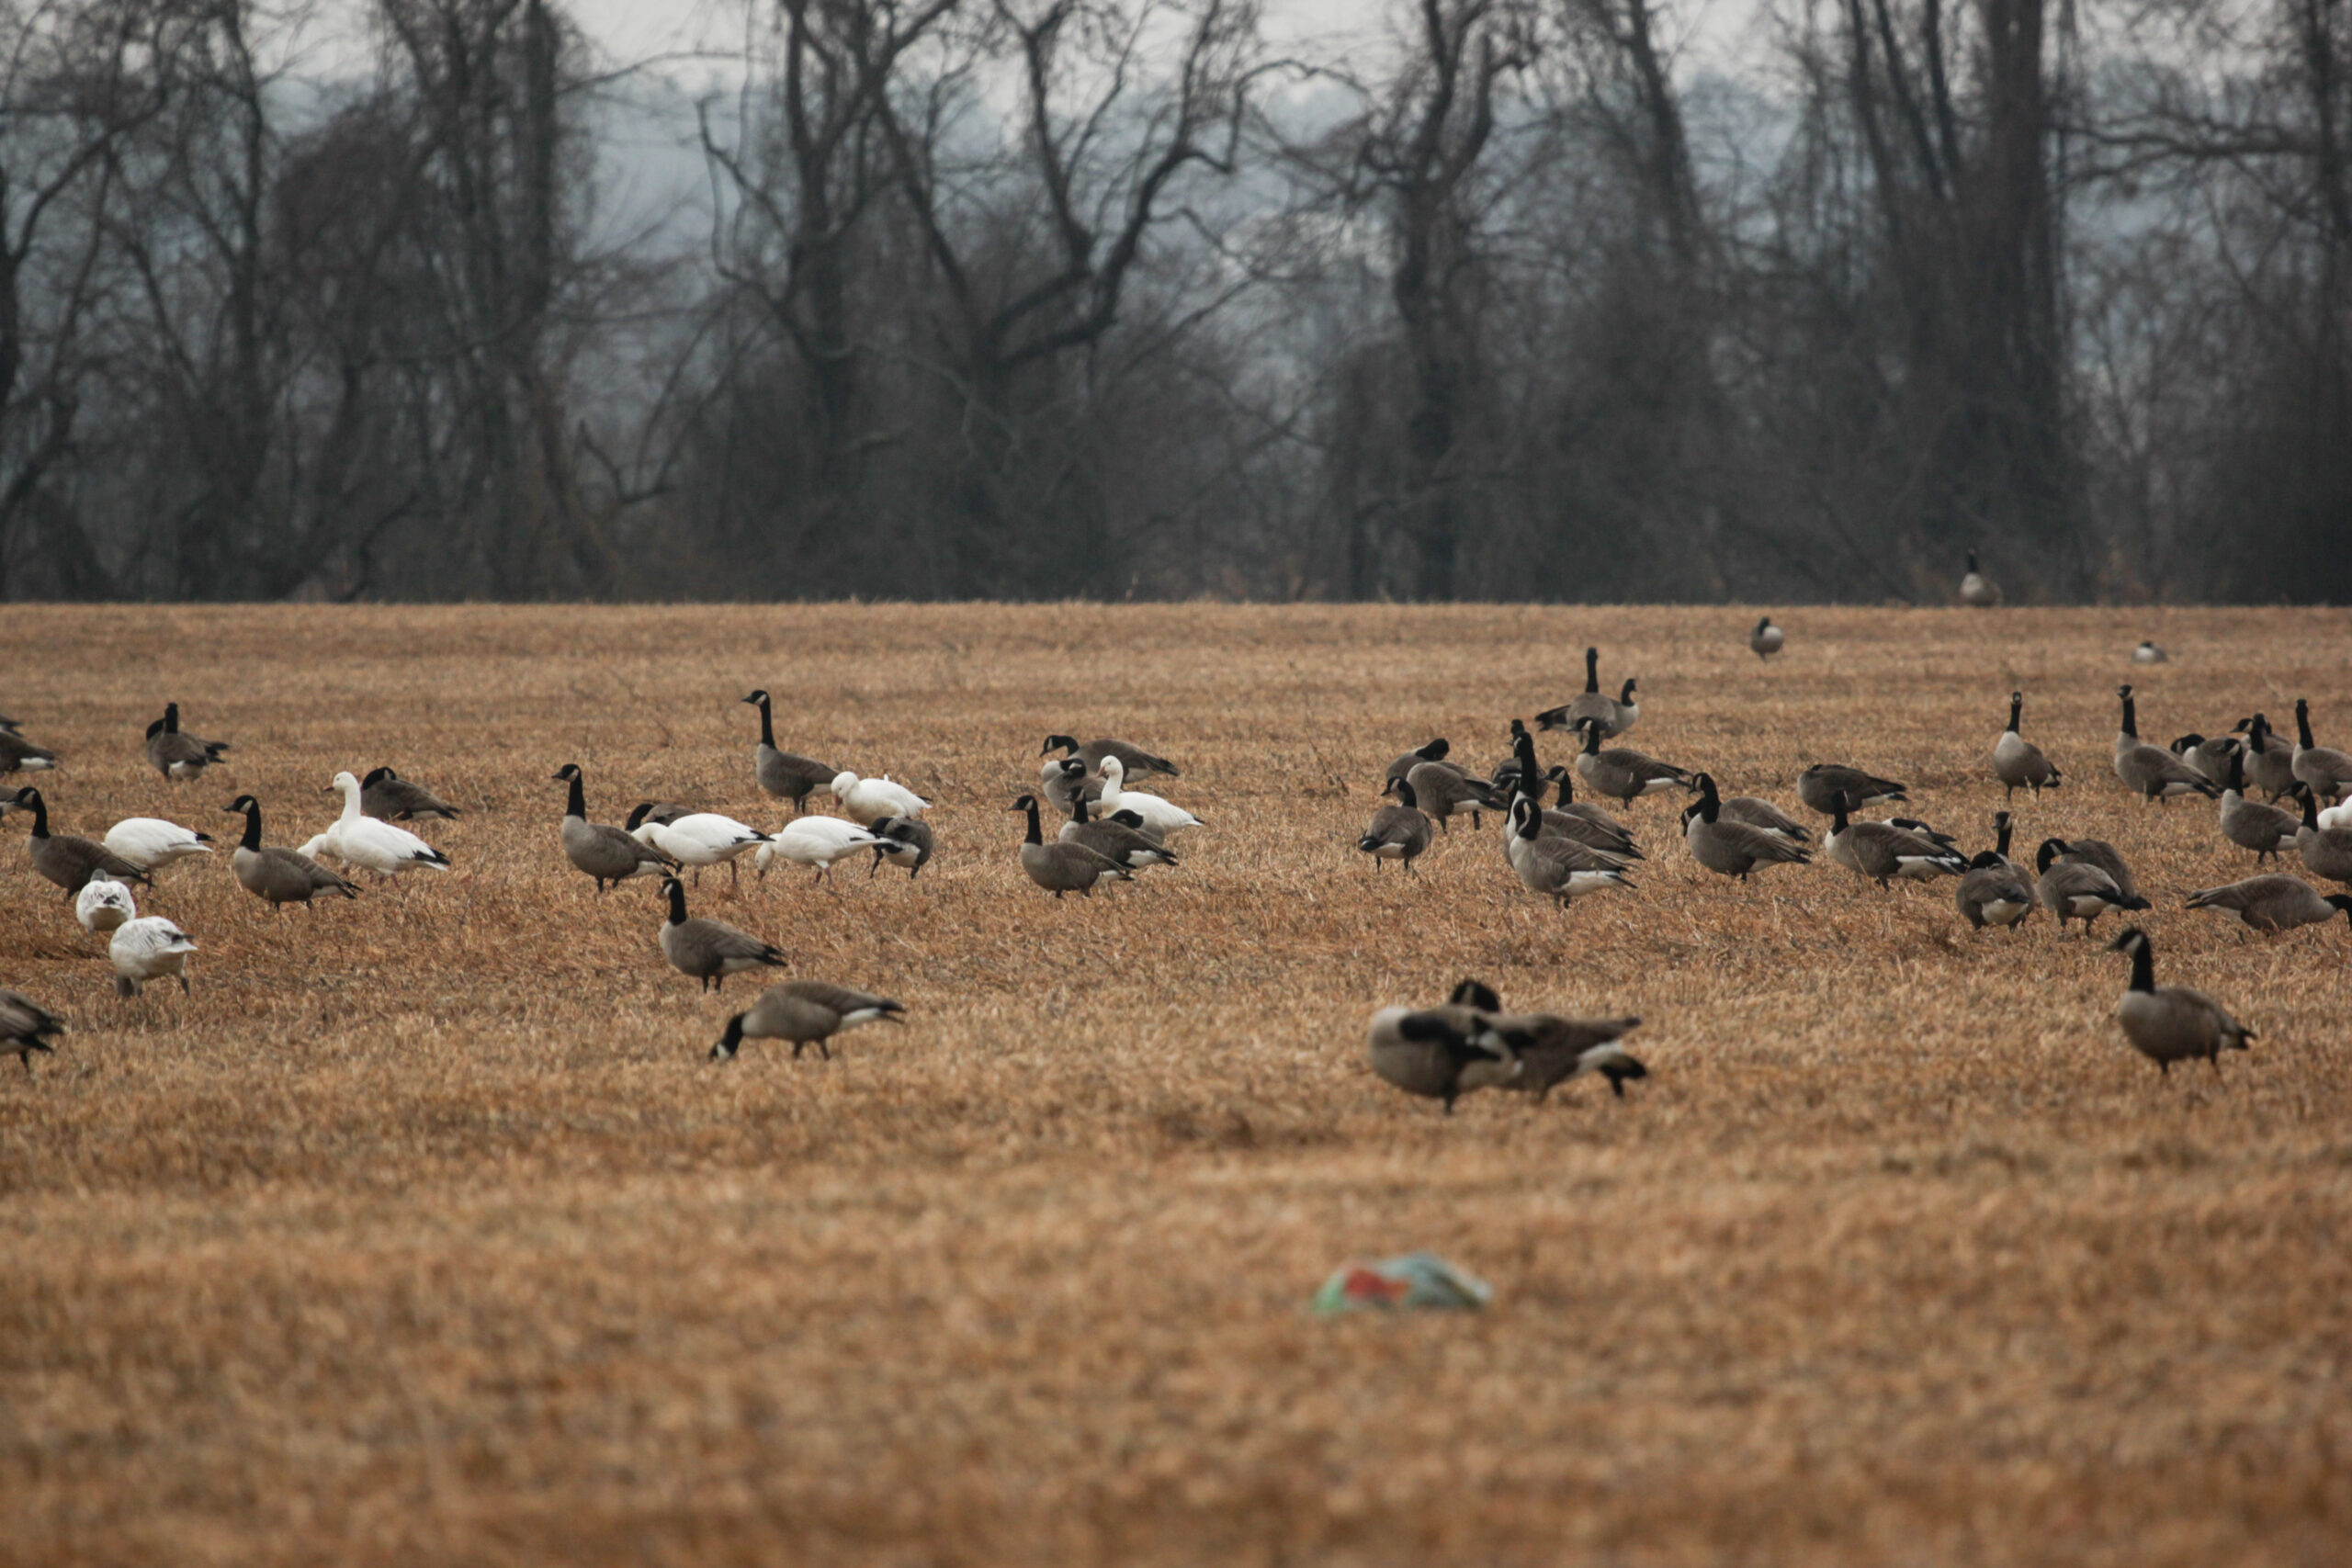 Geese forage in an agricultural field in the Northeast.